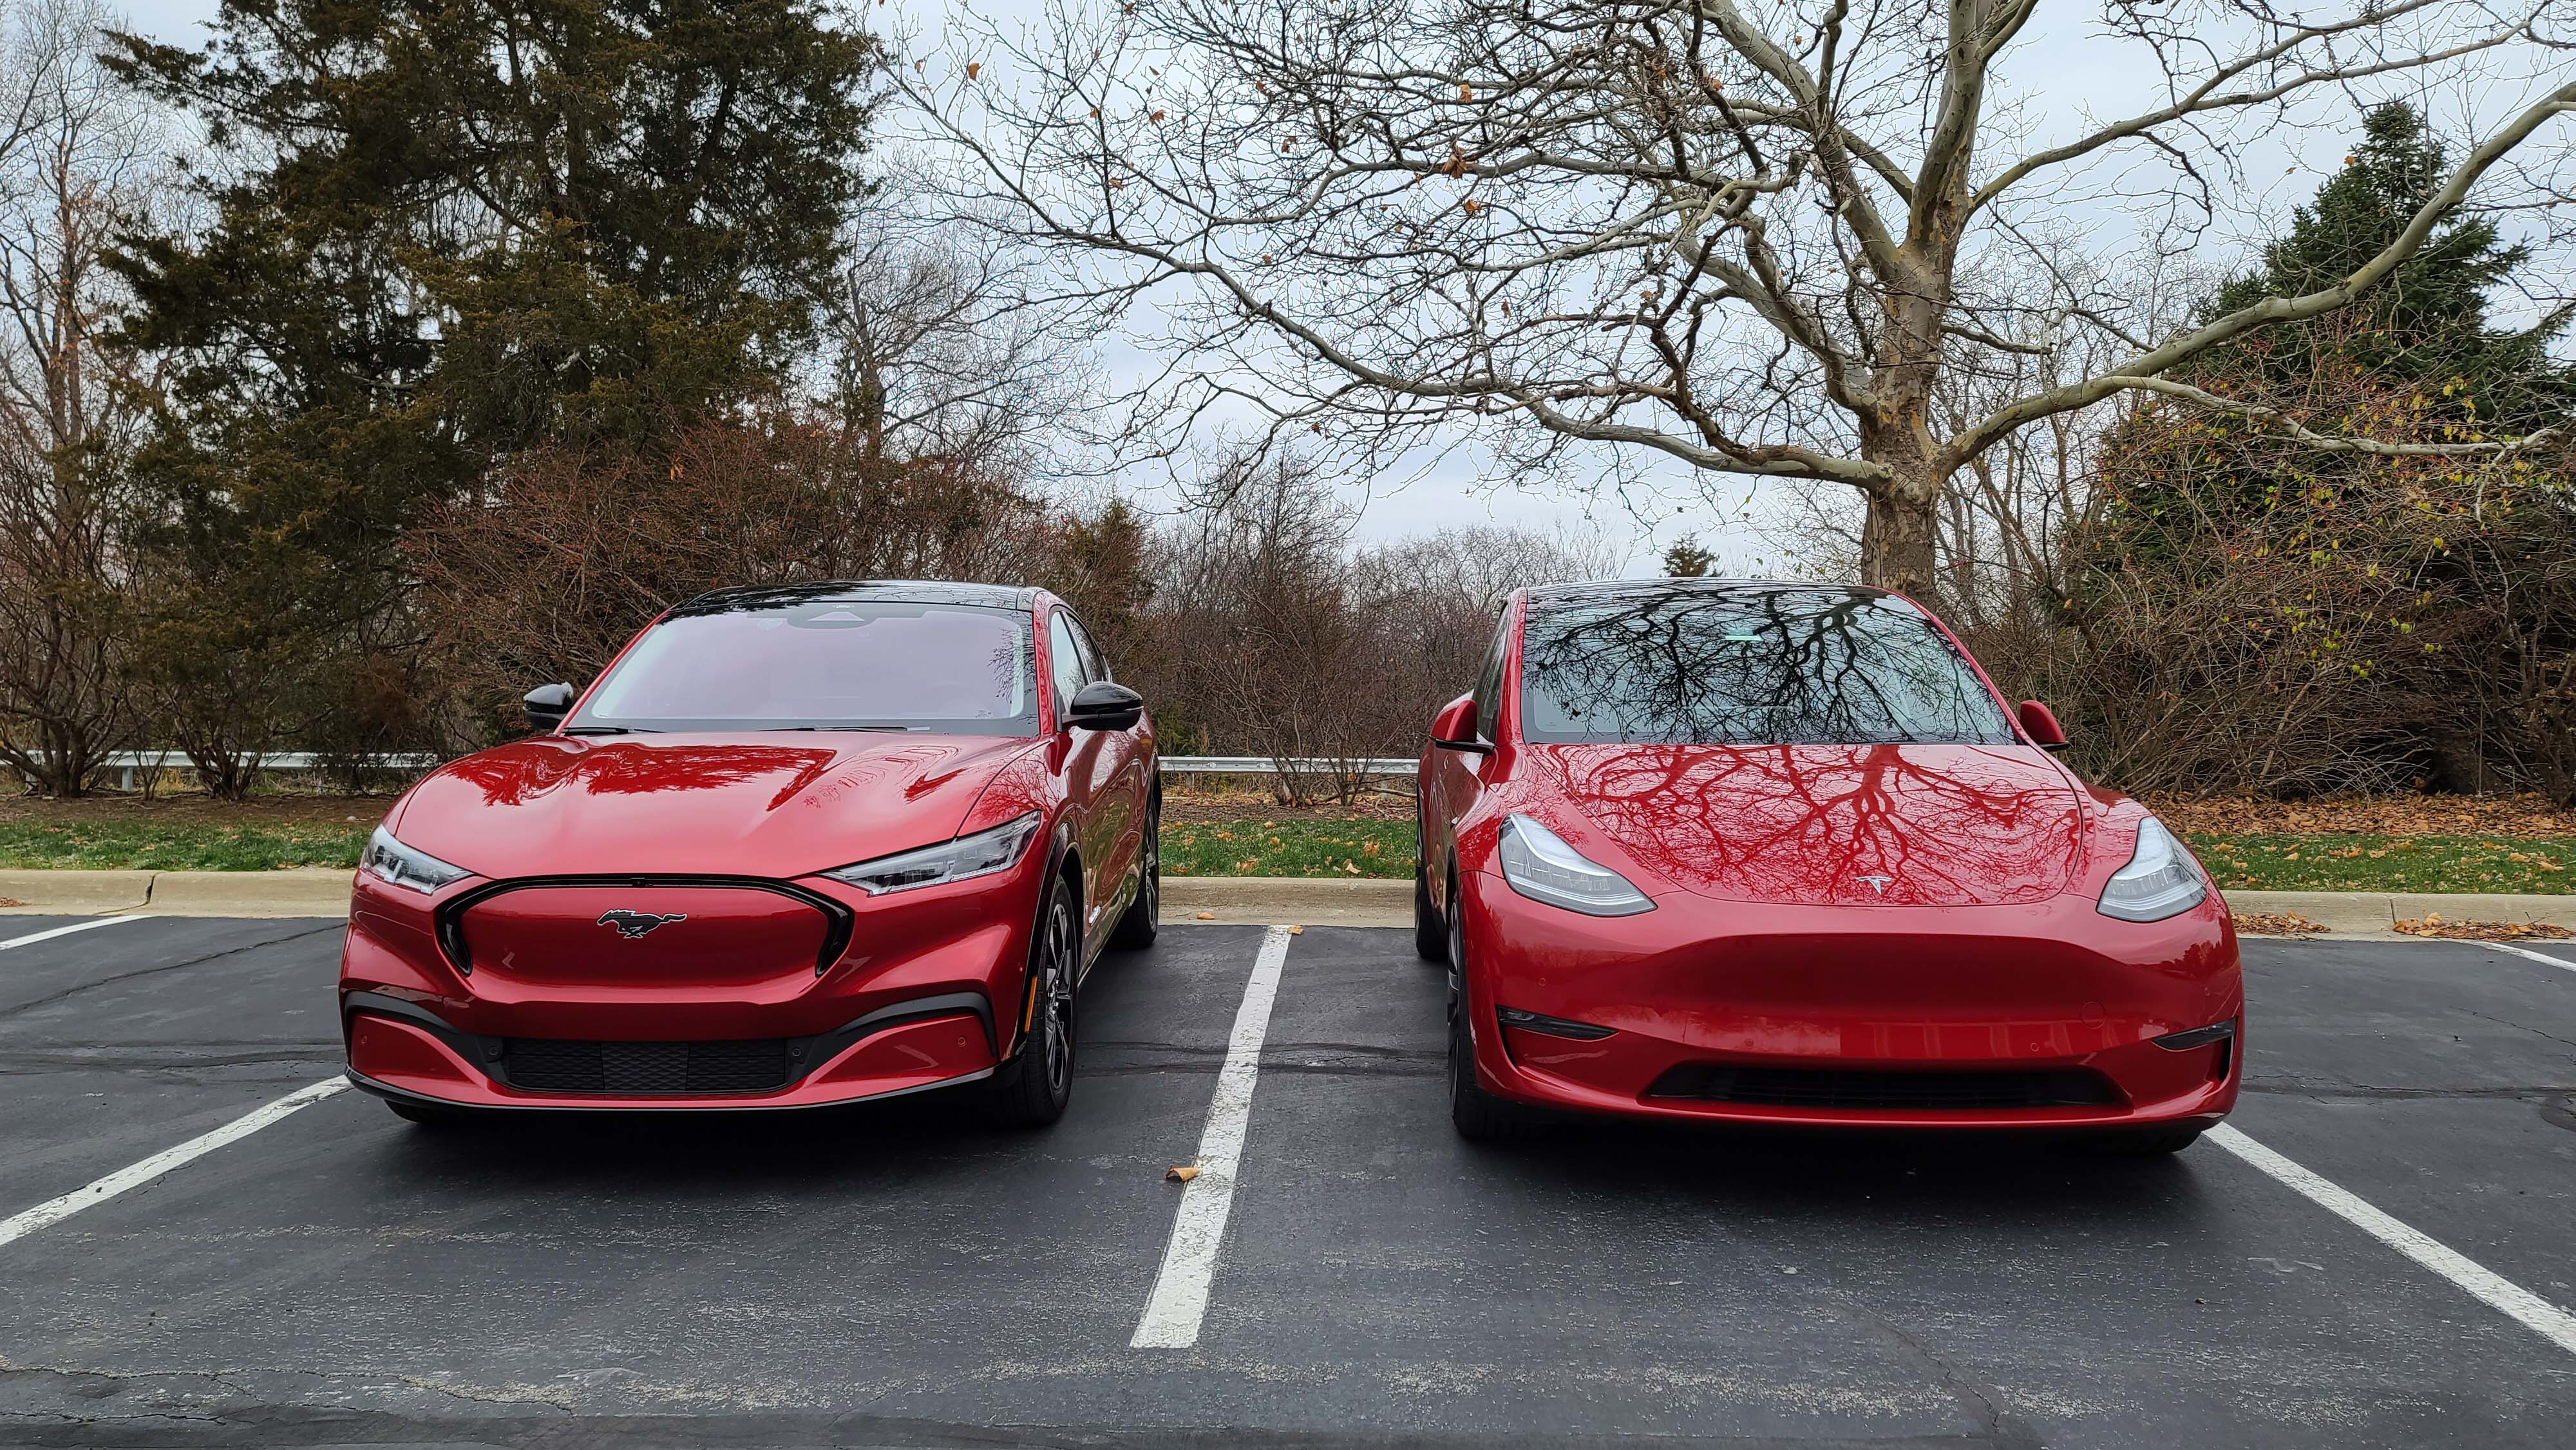 The 2021 Ford Mustang Mach-E (left) and Tesla Model Y (right) offer distinctive front ends. As EVs, neither needs a lot of grille airflow without a gas engine.